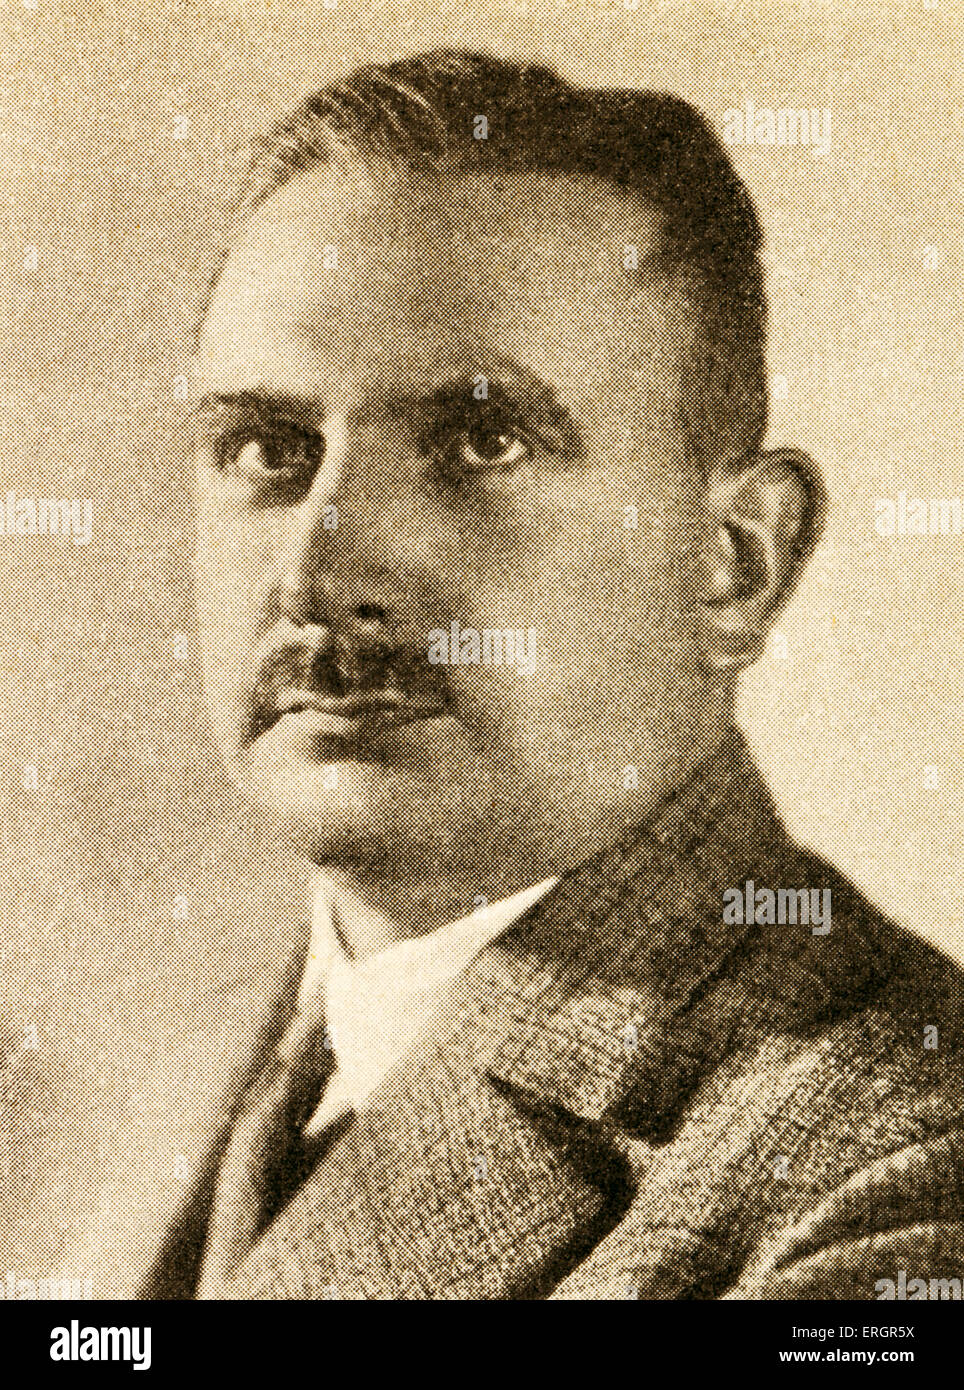 Bernhard Rust, portrait c. 1933. Minister of Science, Education and National Culture (Reichserziehungsminister) in Nazi Germany, 30 September 1883 - 8 May 1945. Stock Photo